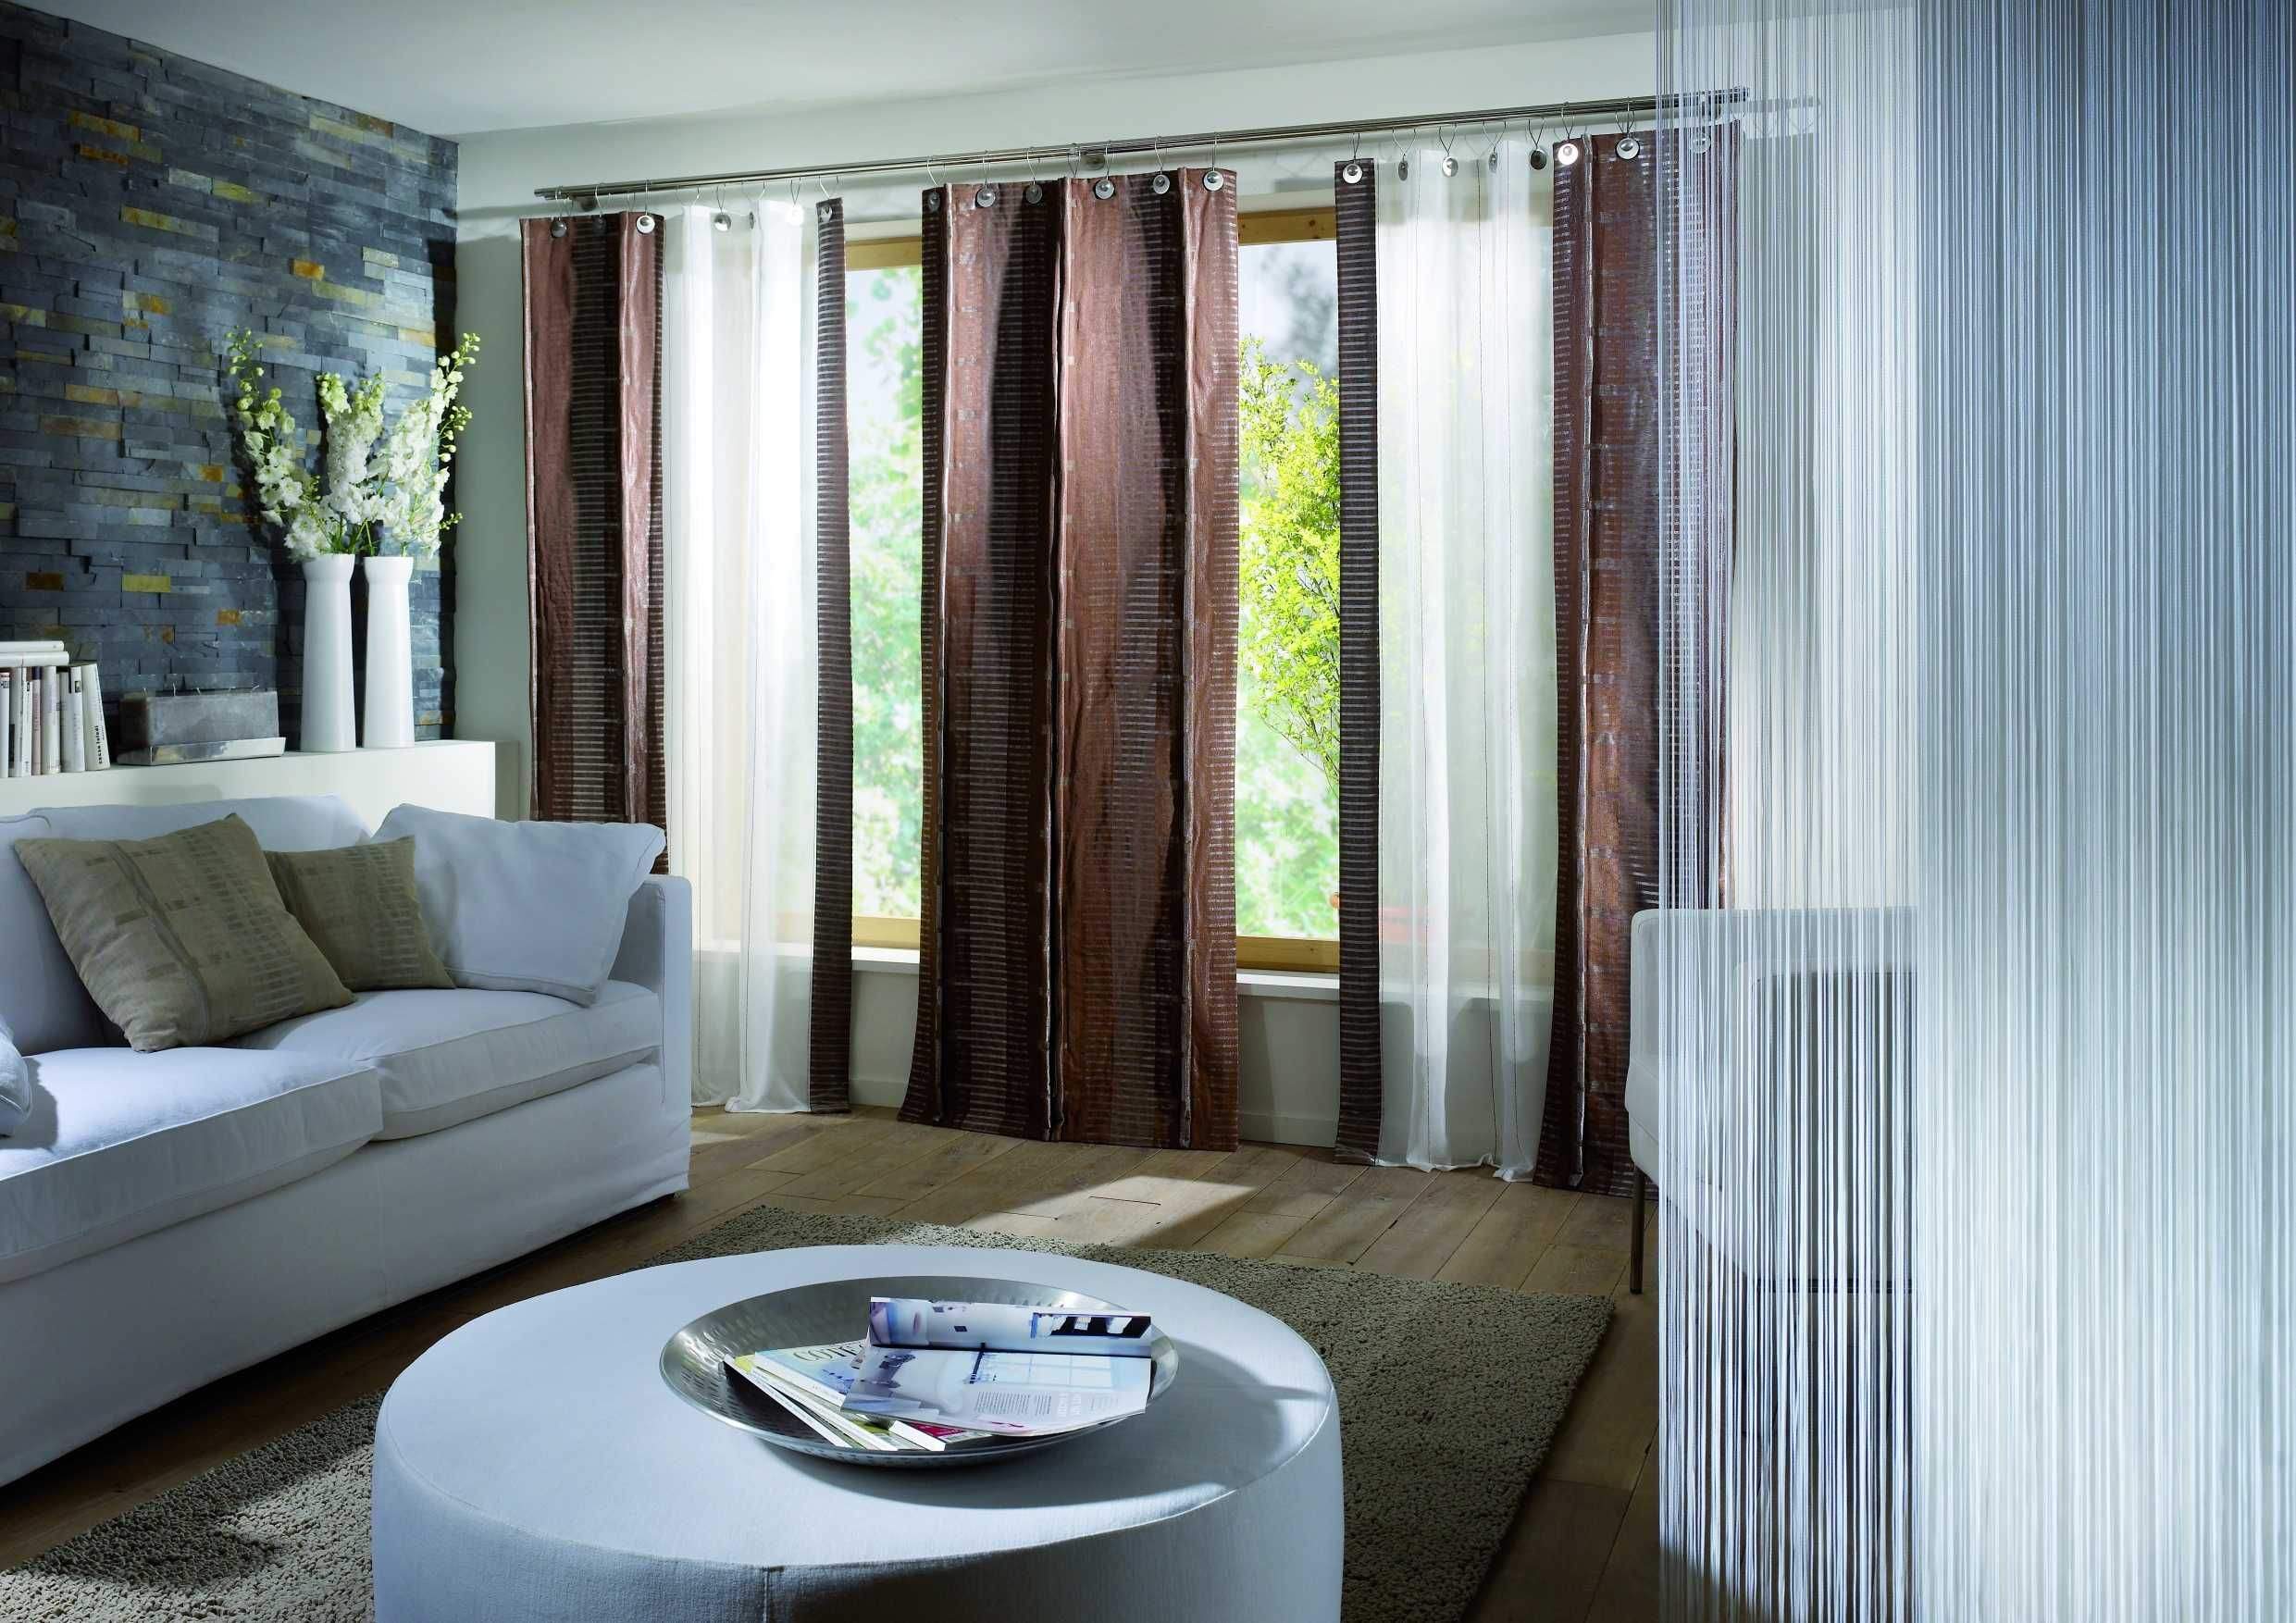 marvellous curtains for a living room window